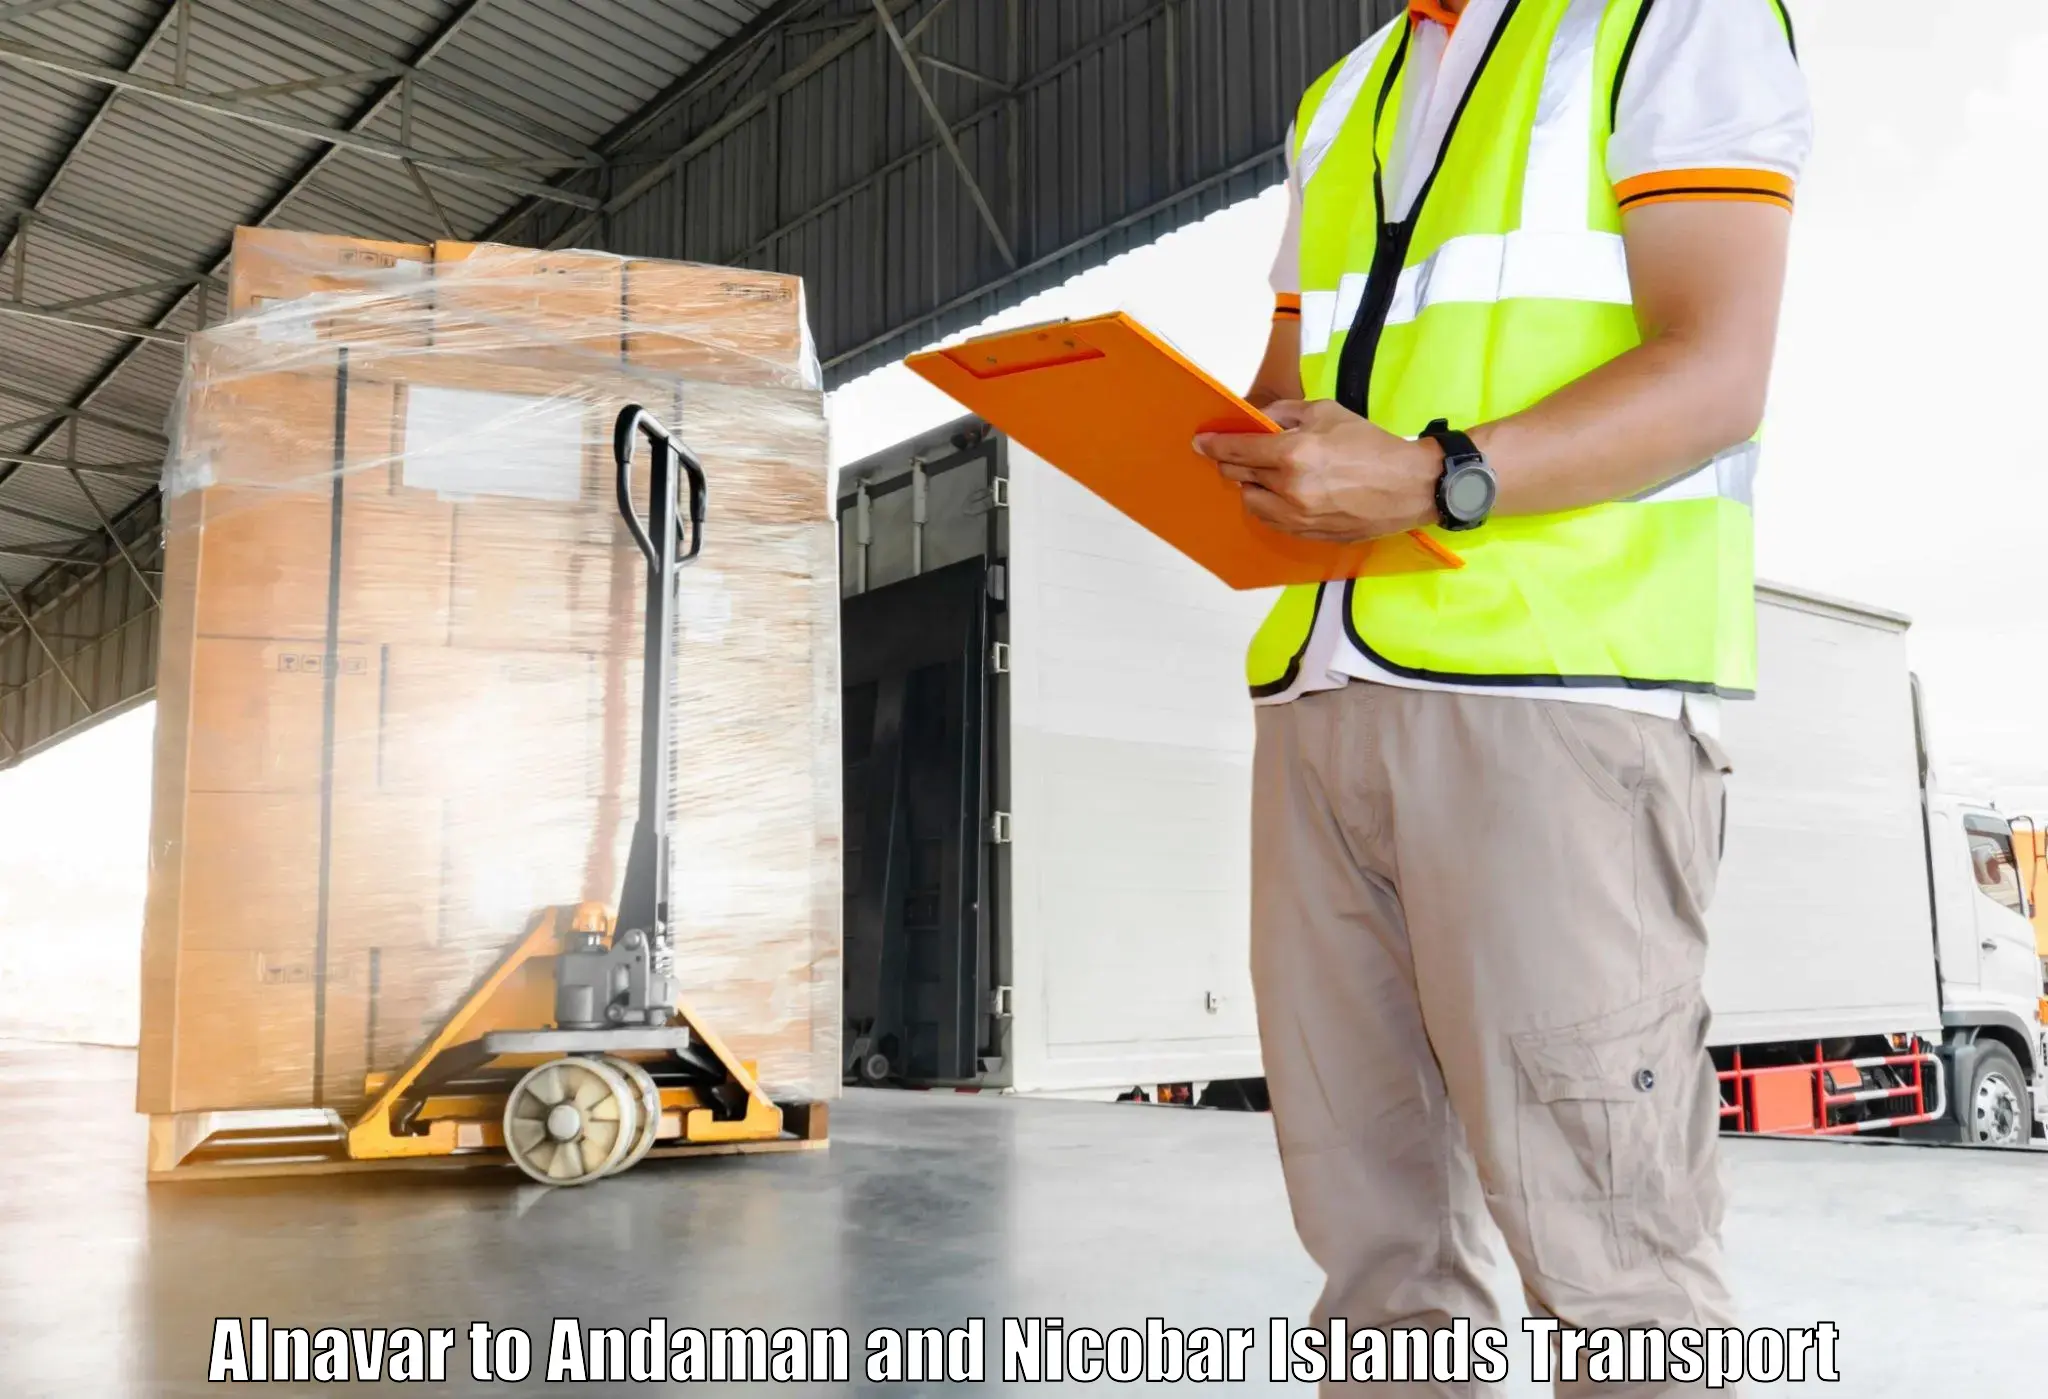 Shipping services Alnavar to Andaman and Nicobar Islands